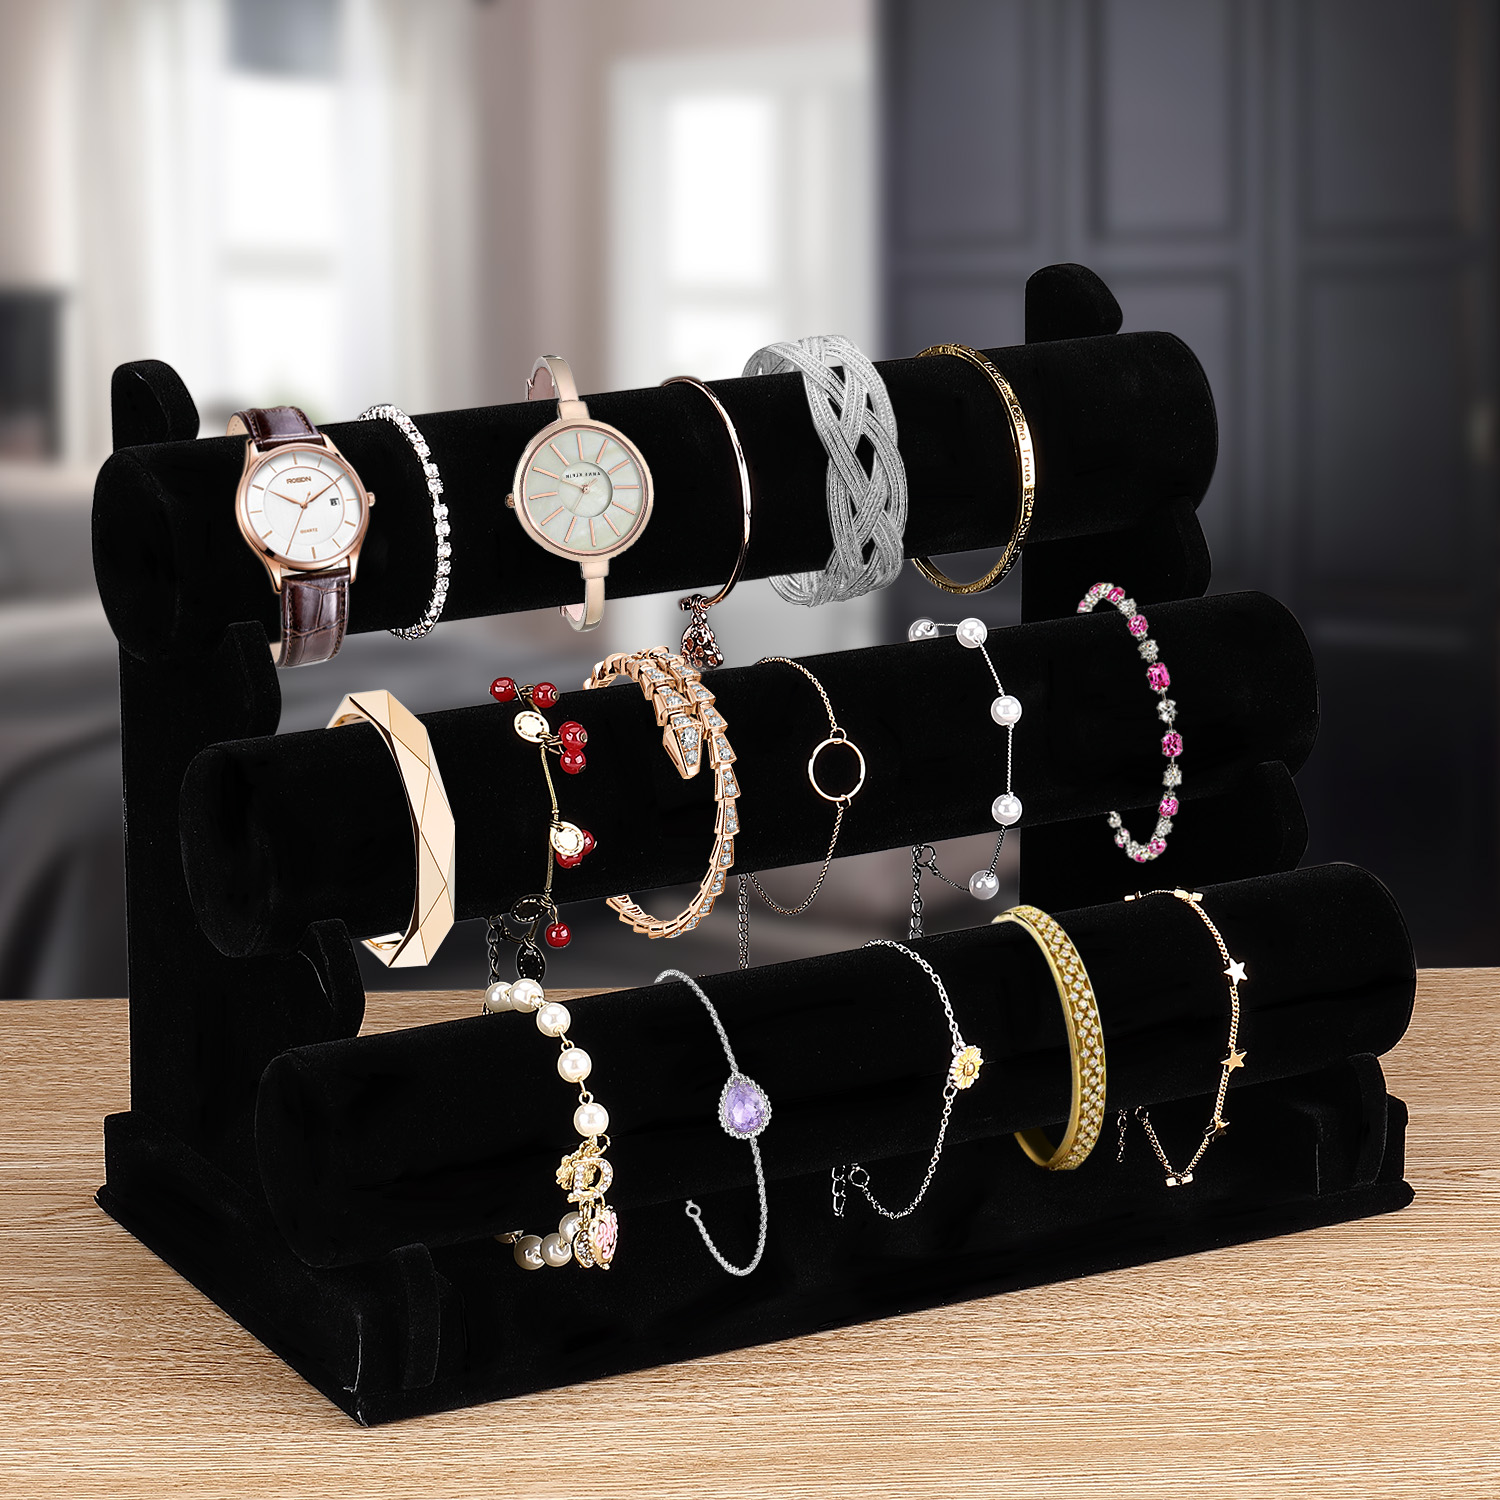 Black Velvet Hovering 3 Tier T-bar Jewelry Stand Display Storage Store ...